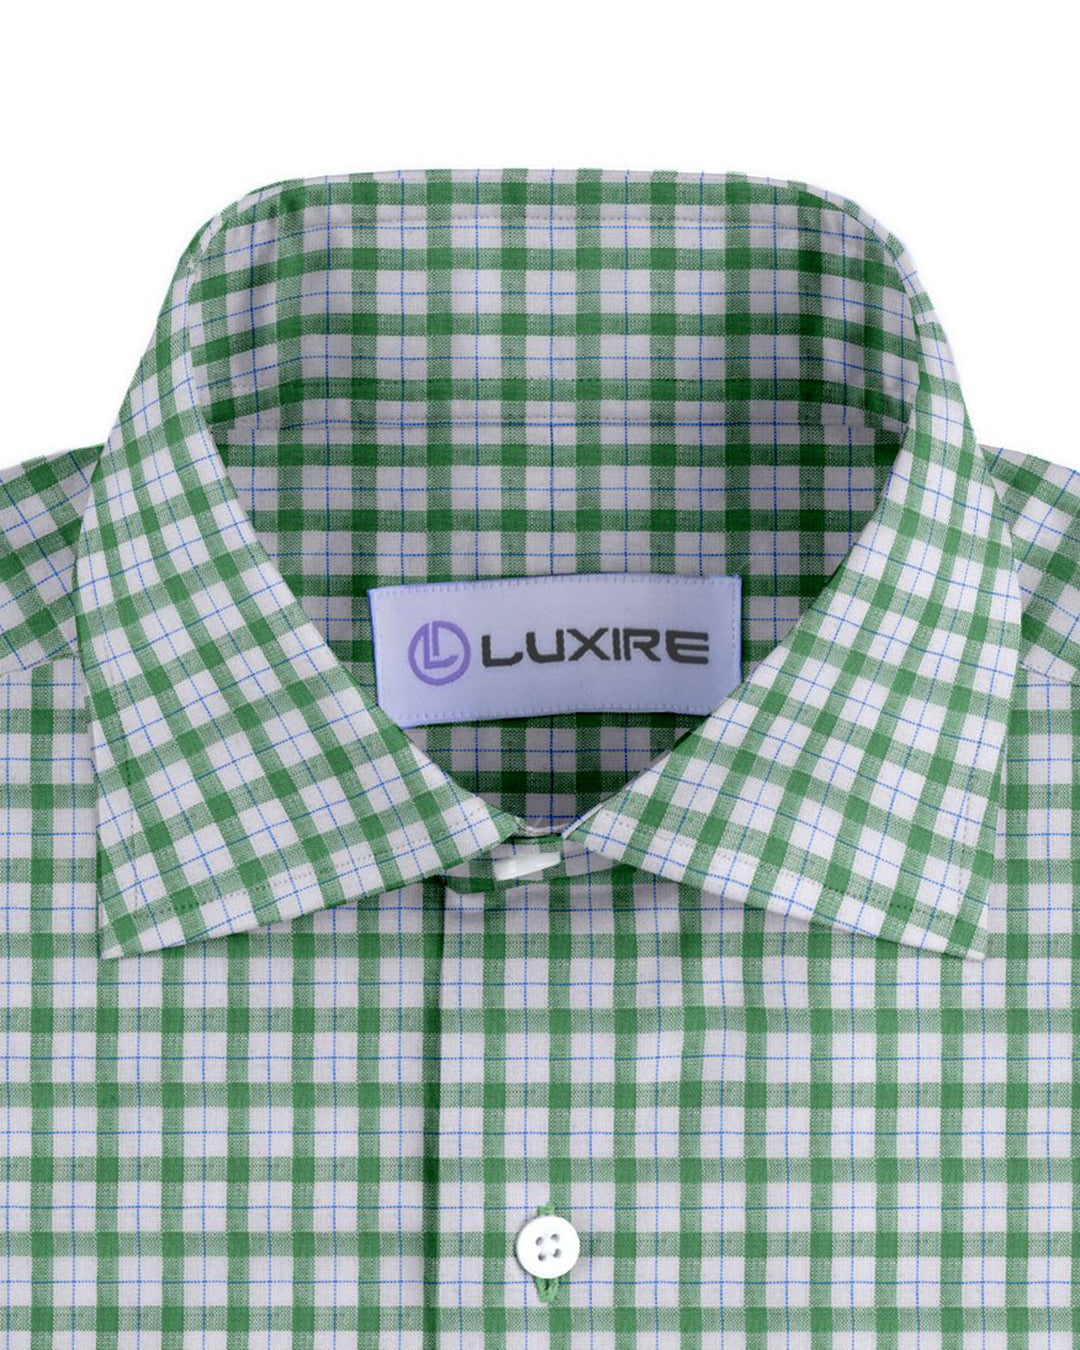 Collar of the custom linen shirt for men in green and blue checks on white by Luxire Clothing